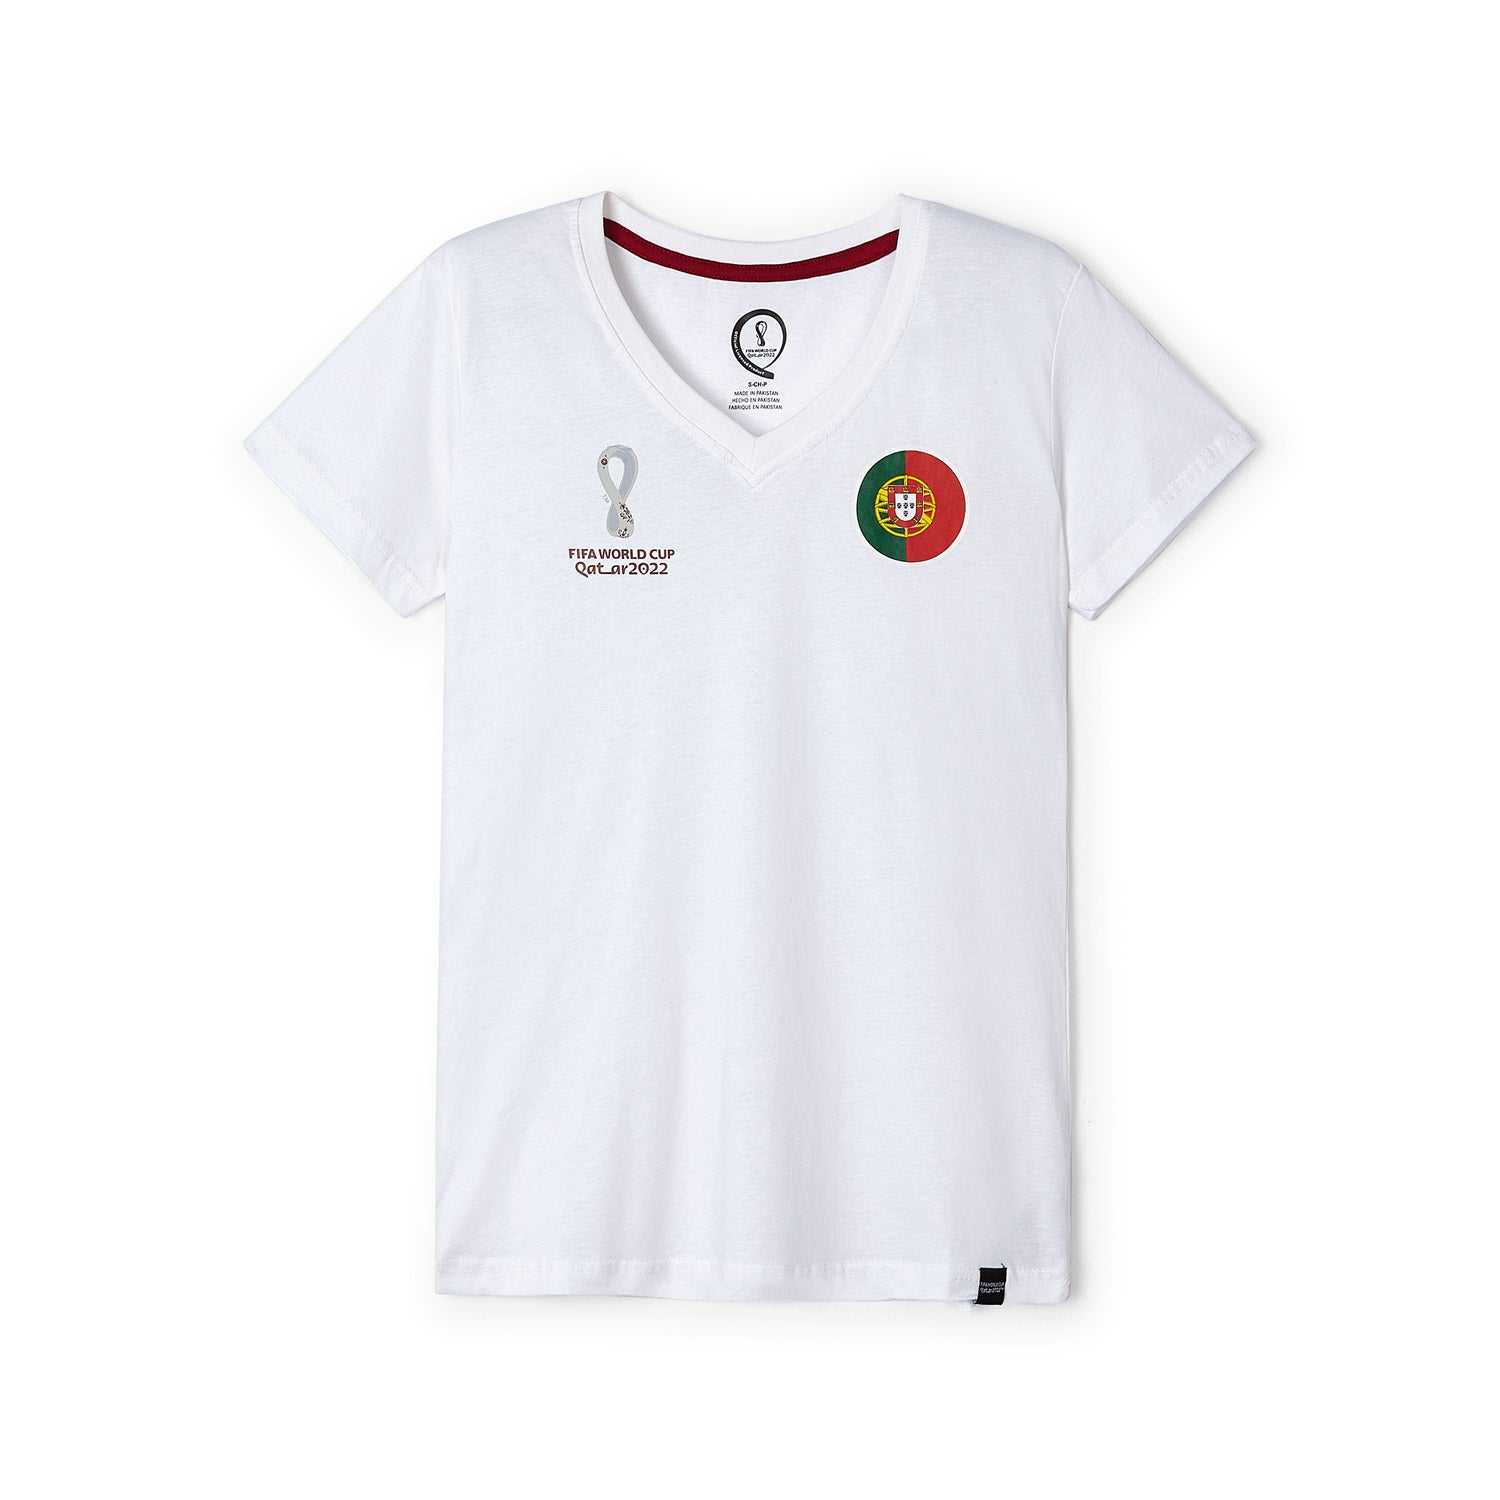 2022 World Cup Portugal White T-Shirt - Women's